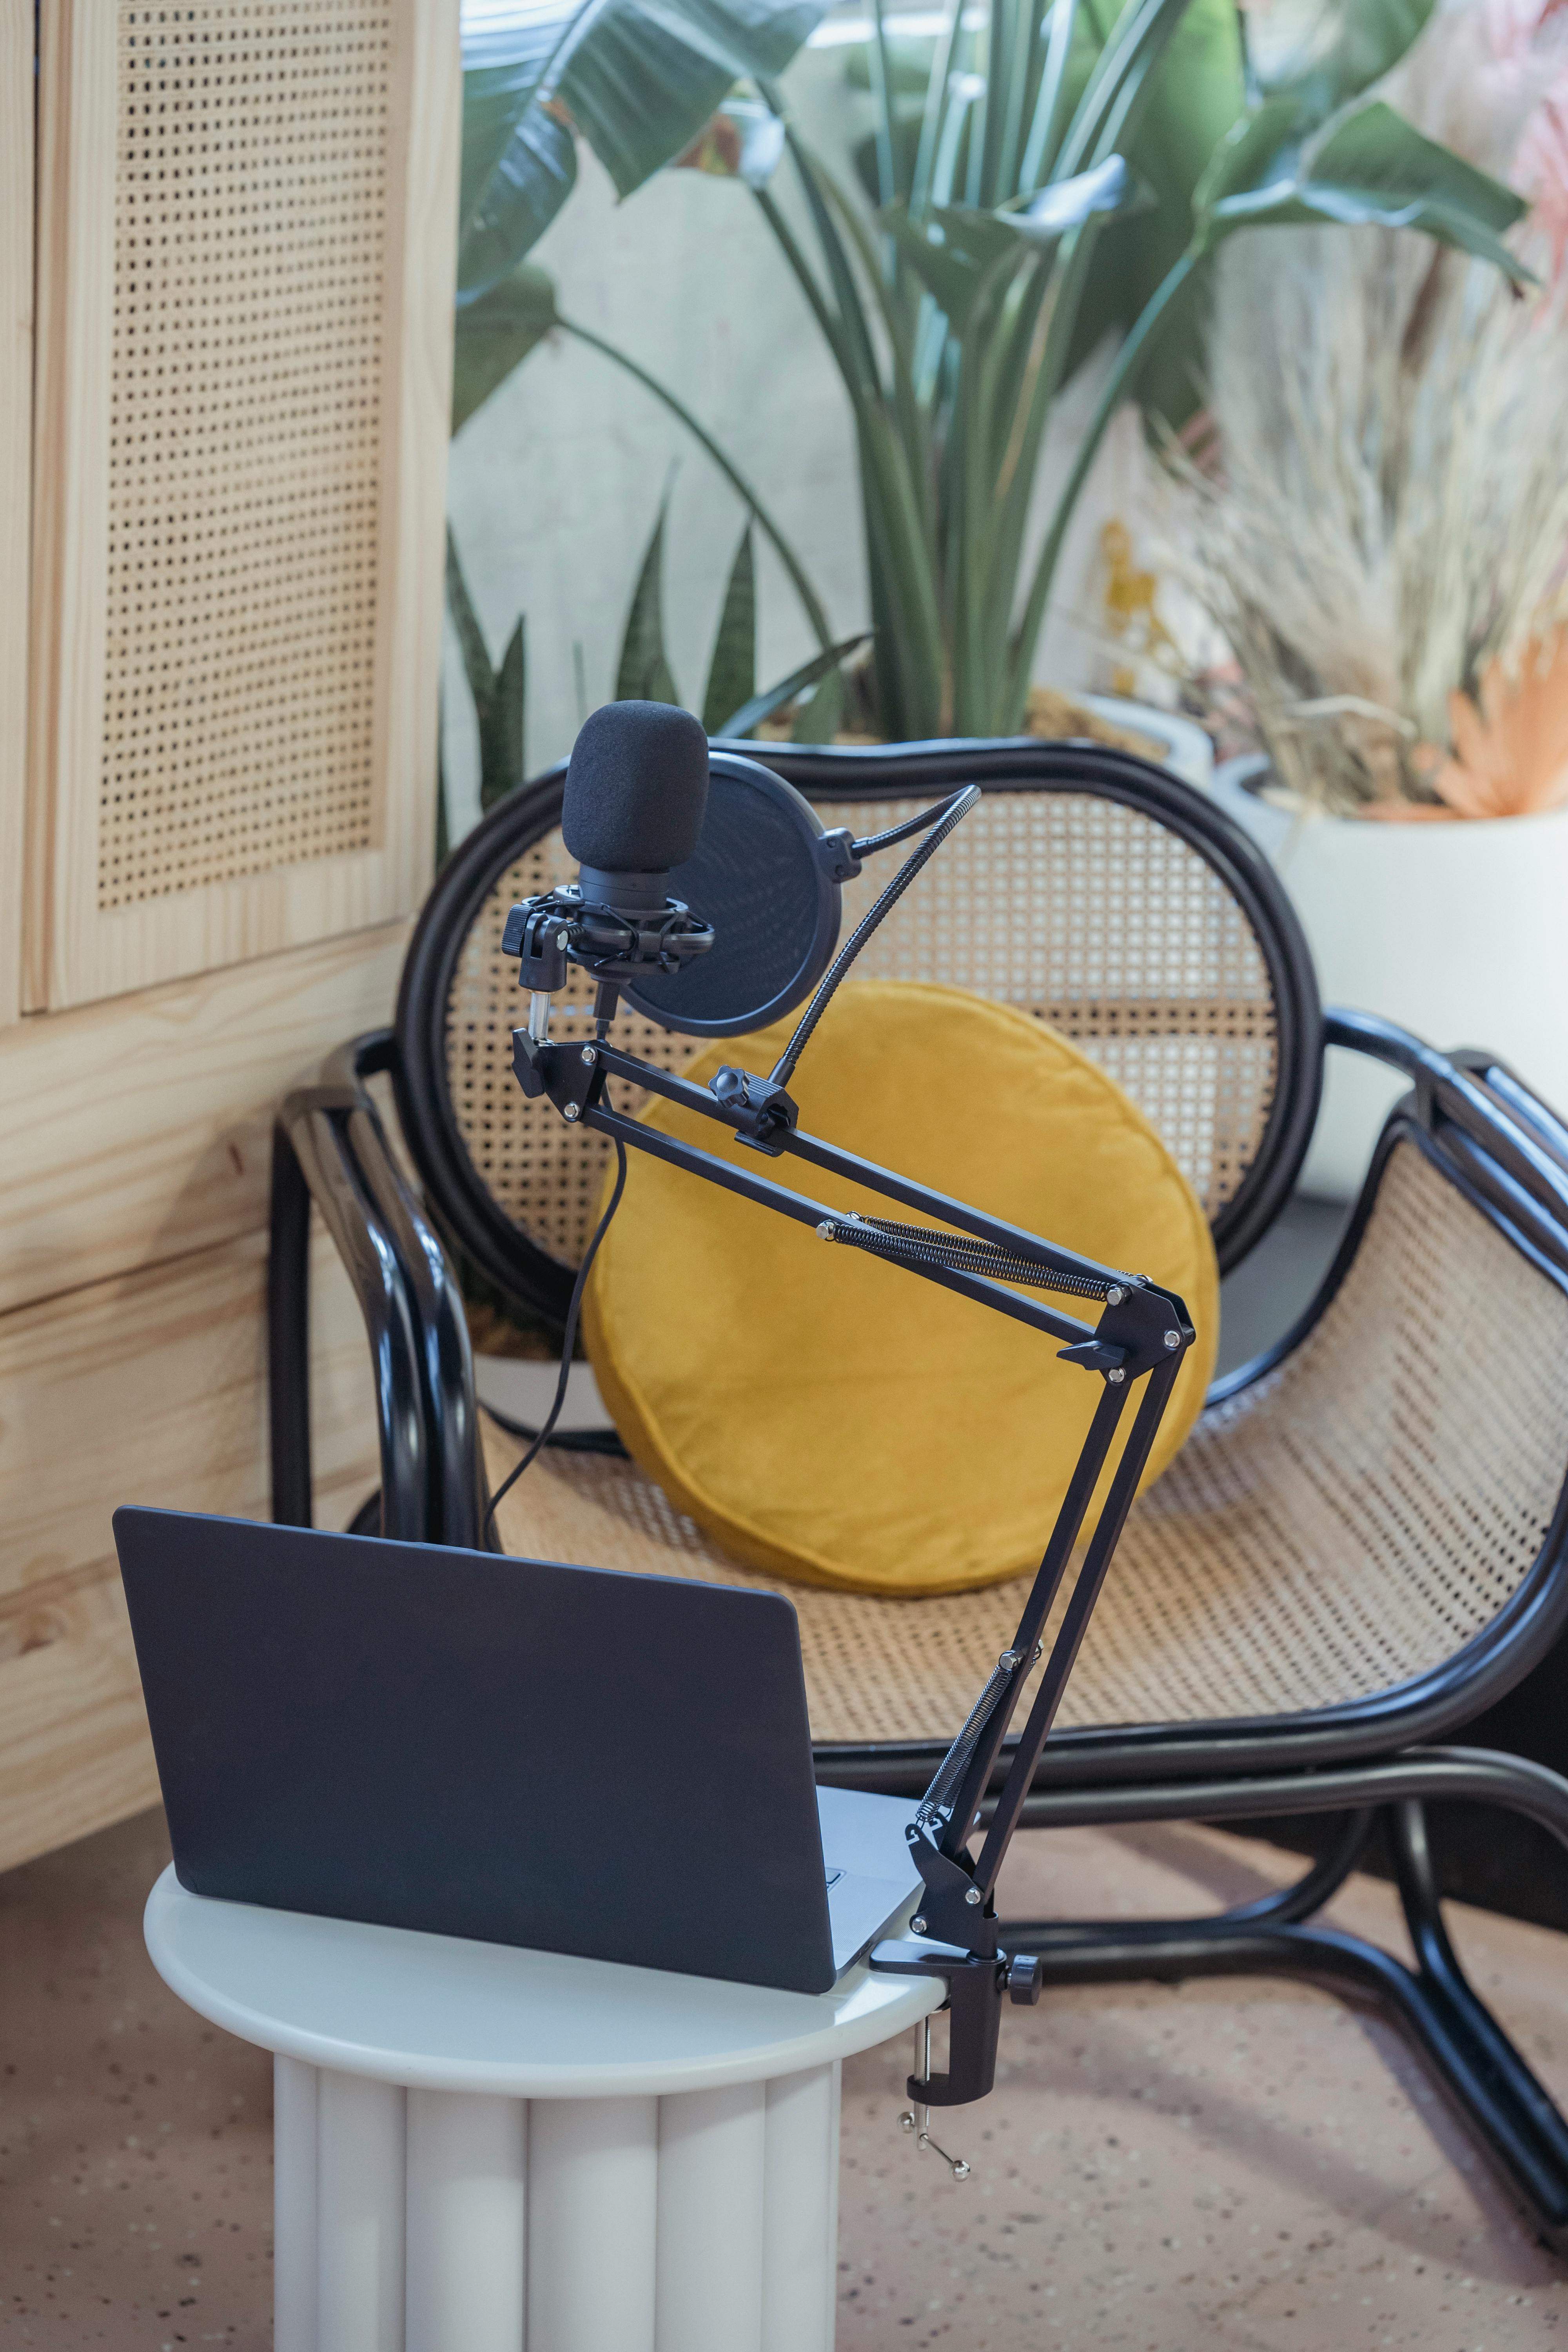 “The Role Of Soundproofing Materials In Podcasting”